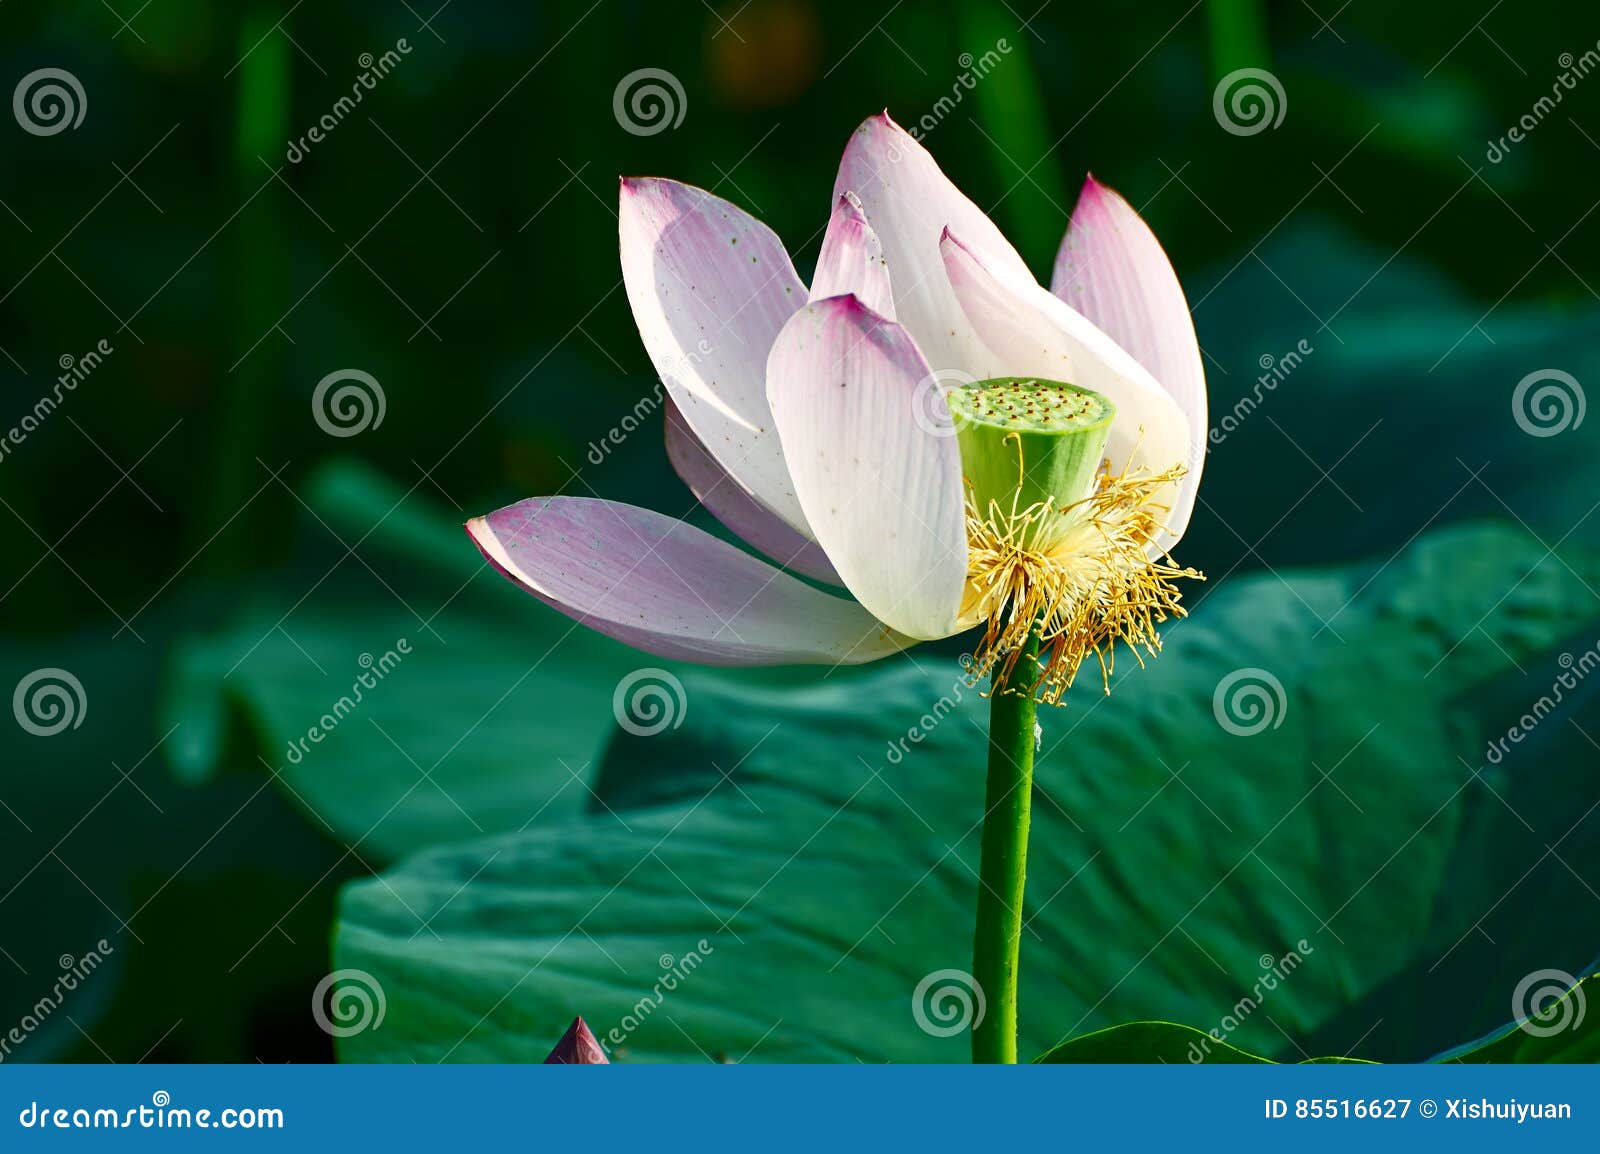 the water lily pistil